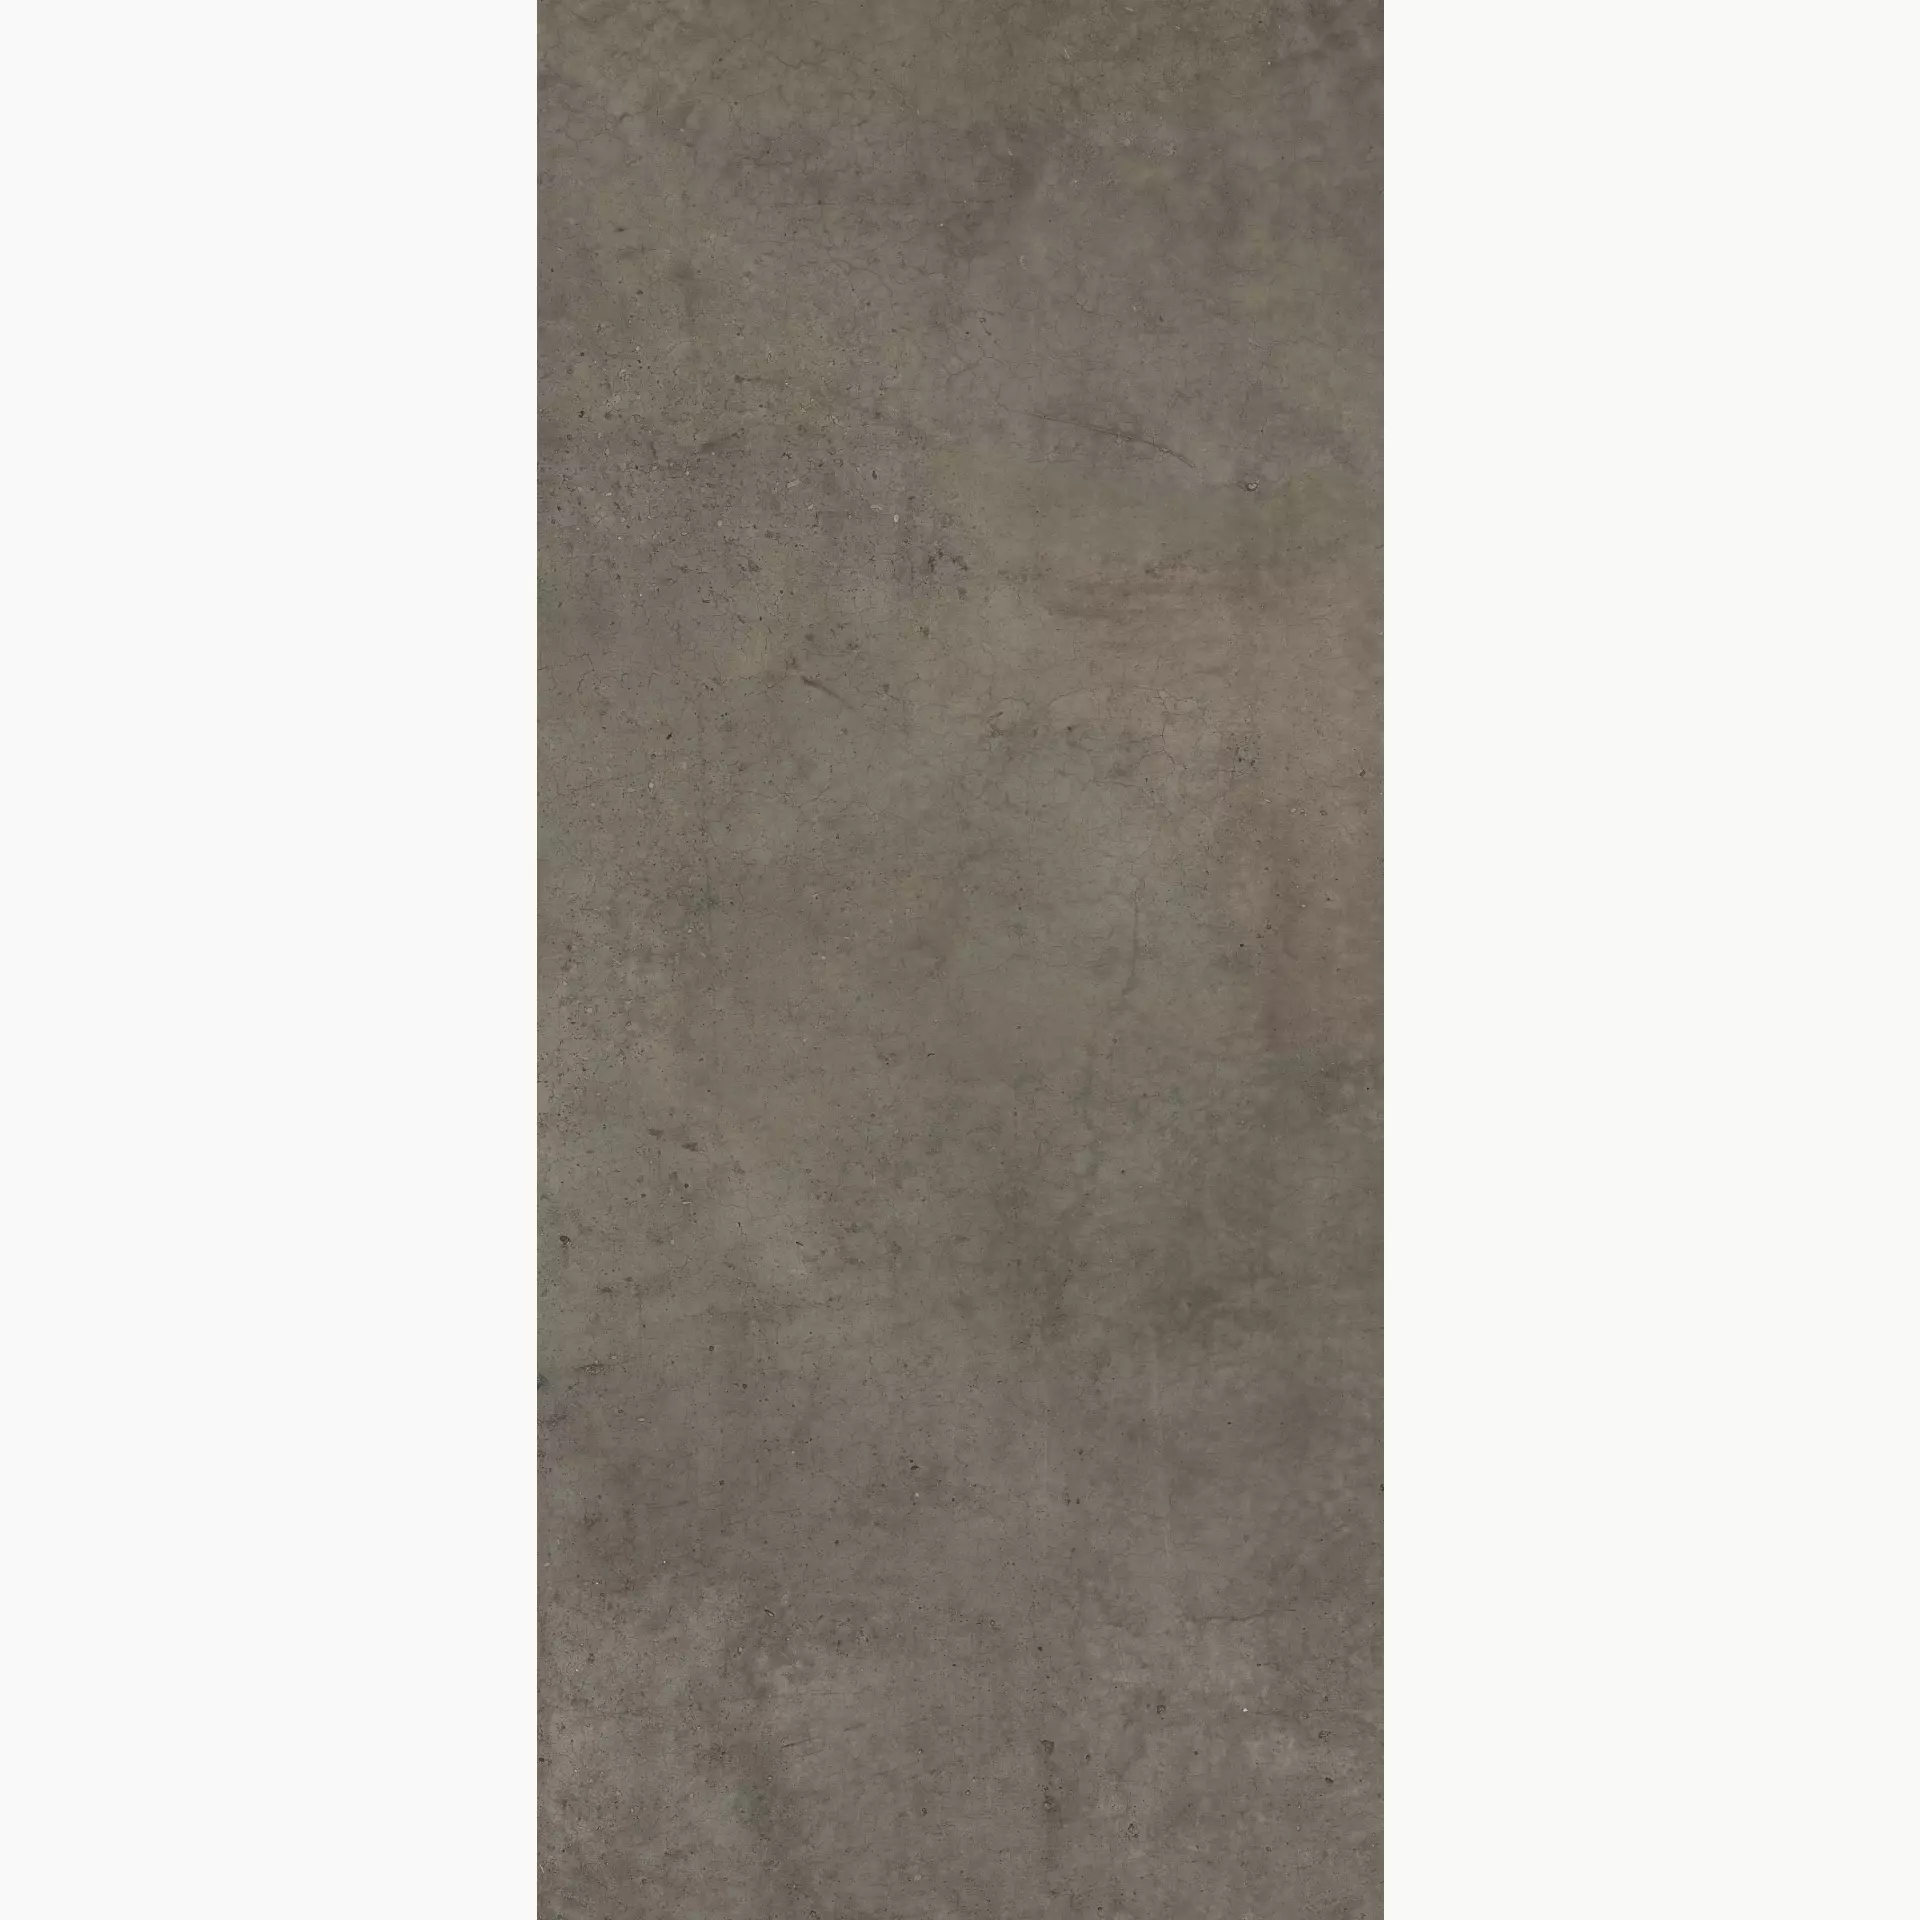 Flaviker Hyper Taupe Naturale PF60008080 120x280cm rectified 6mm